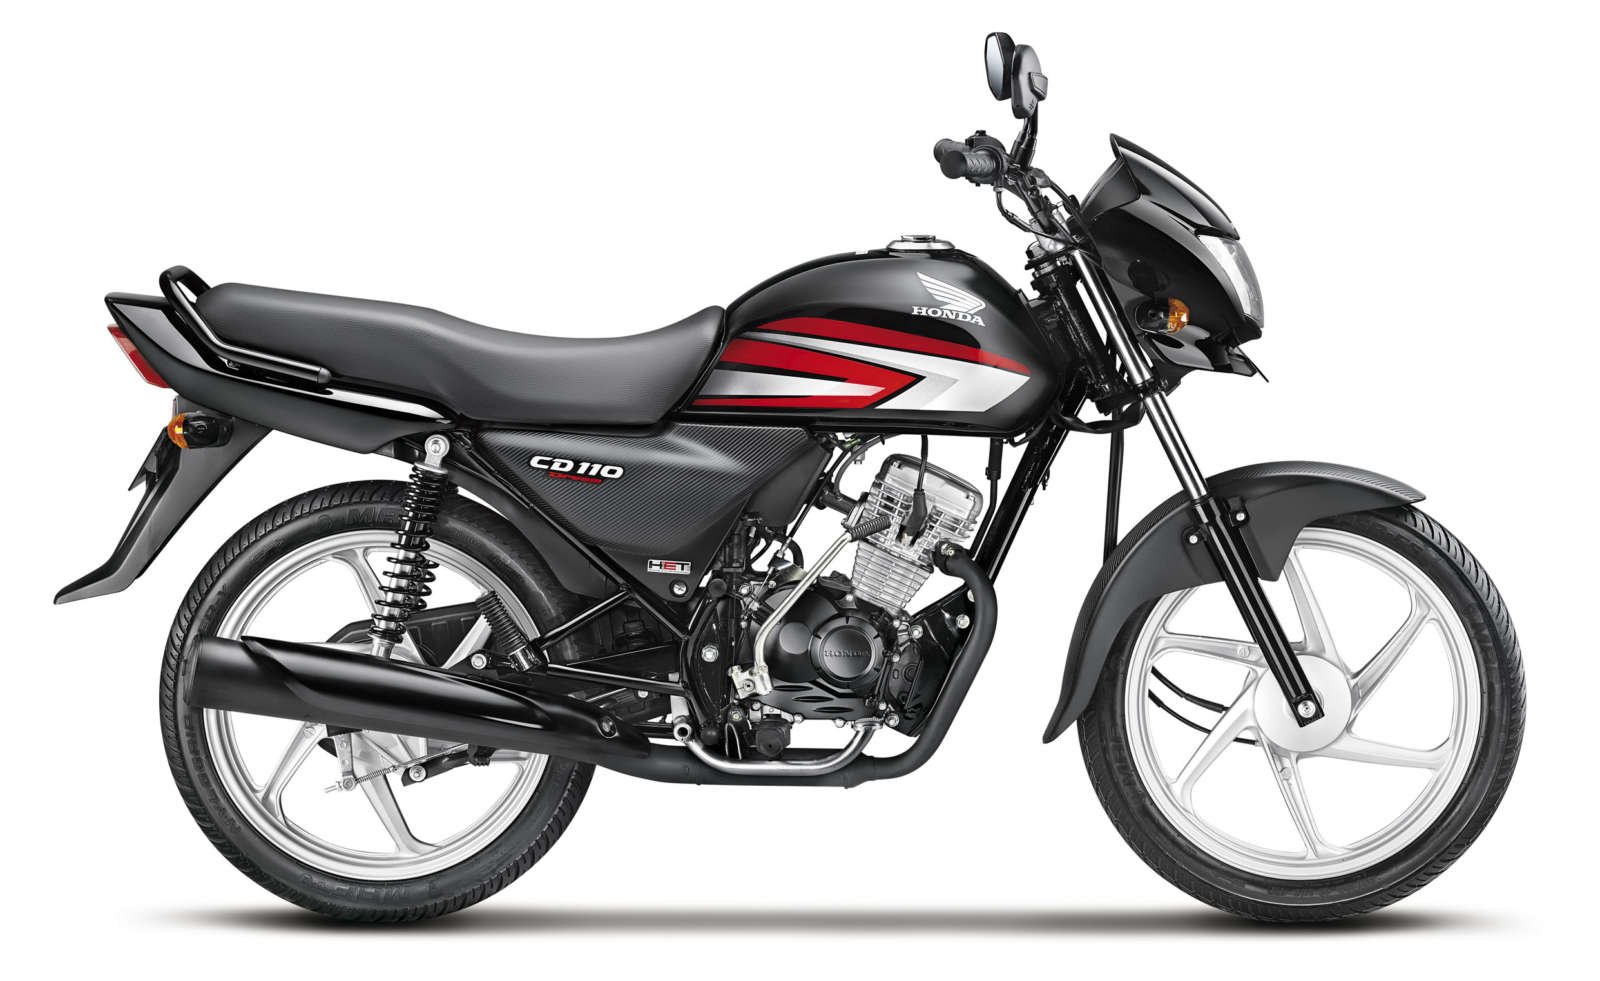 Honda CD 110 Dream launched at Rs. 41,100, will be in